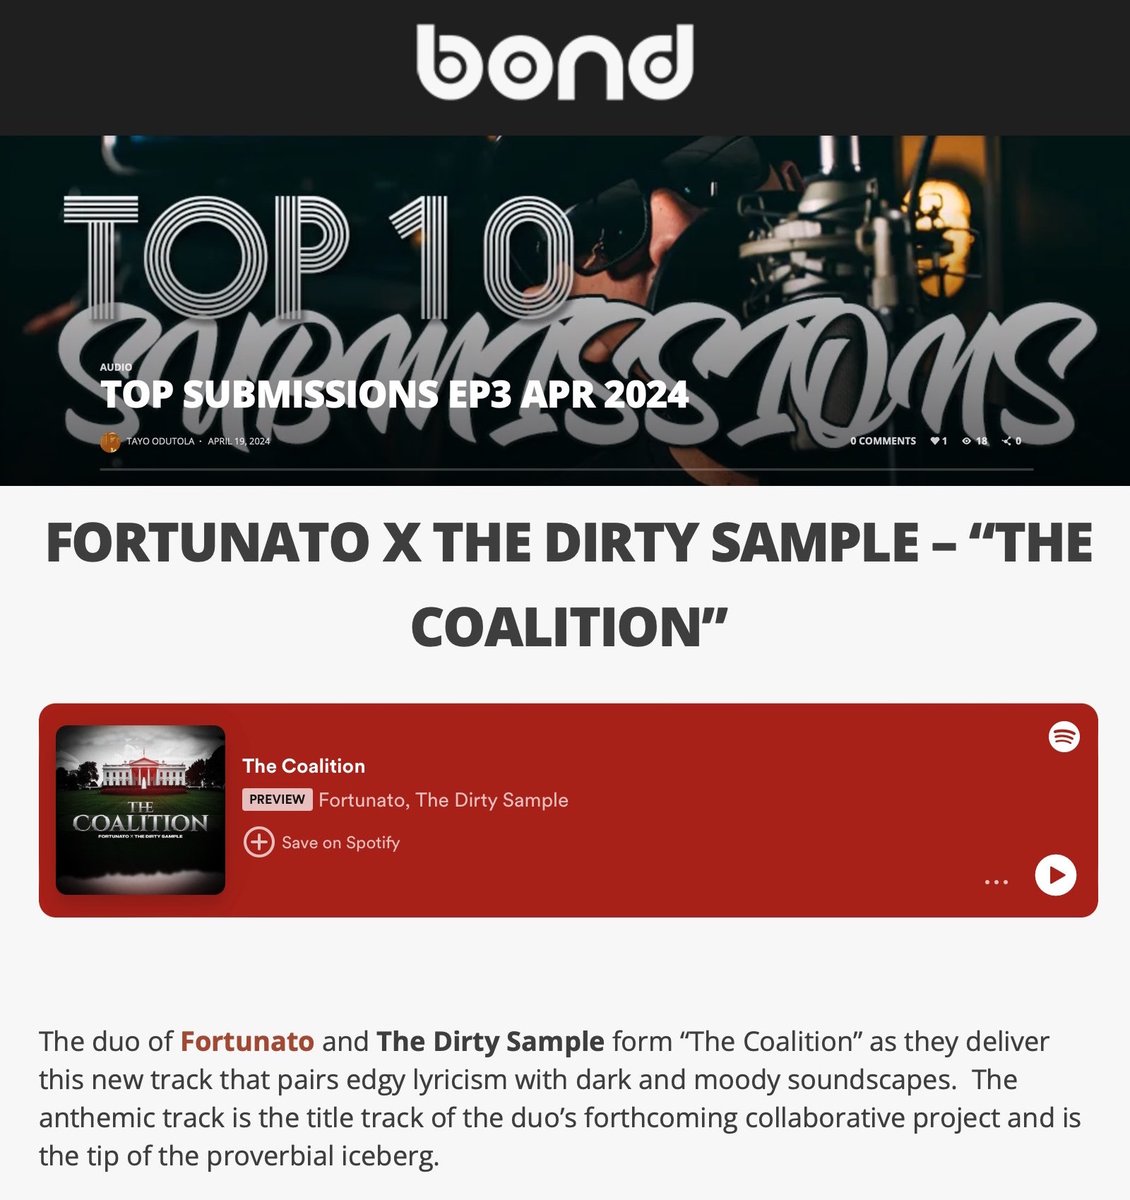 ” … pairs edgy lyricism with dark and moody soundscapes.” A new short review of @IAMFORTUNATO x The Dirty Sample’s second single and title track of upcoming album The Coalition by @thewordisbond… thewordisbond.com/top-submission…